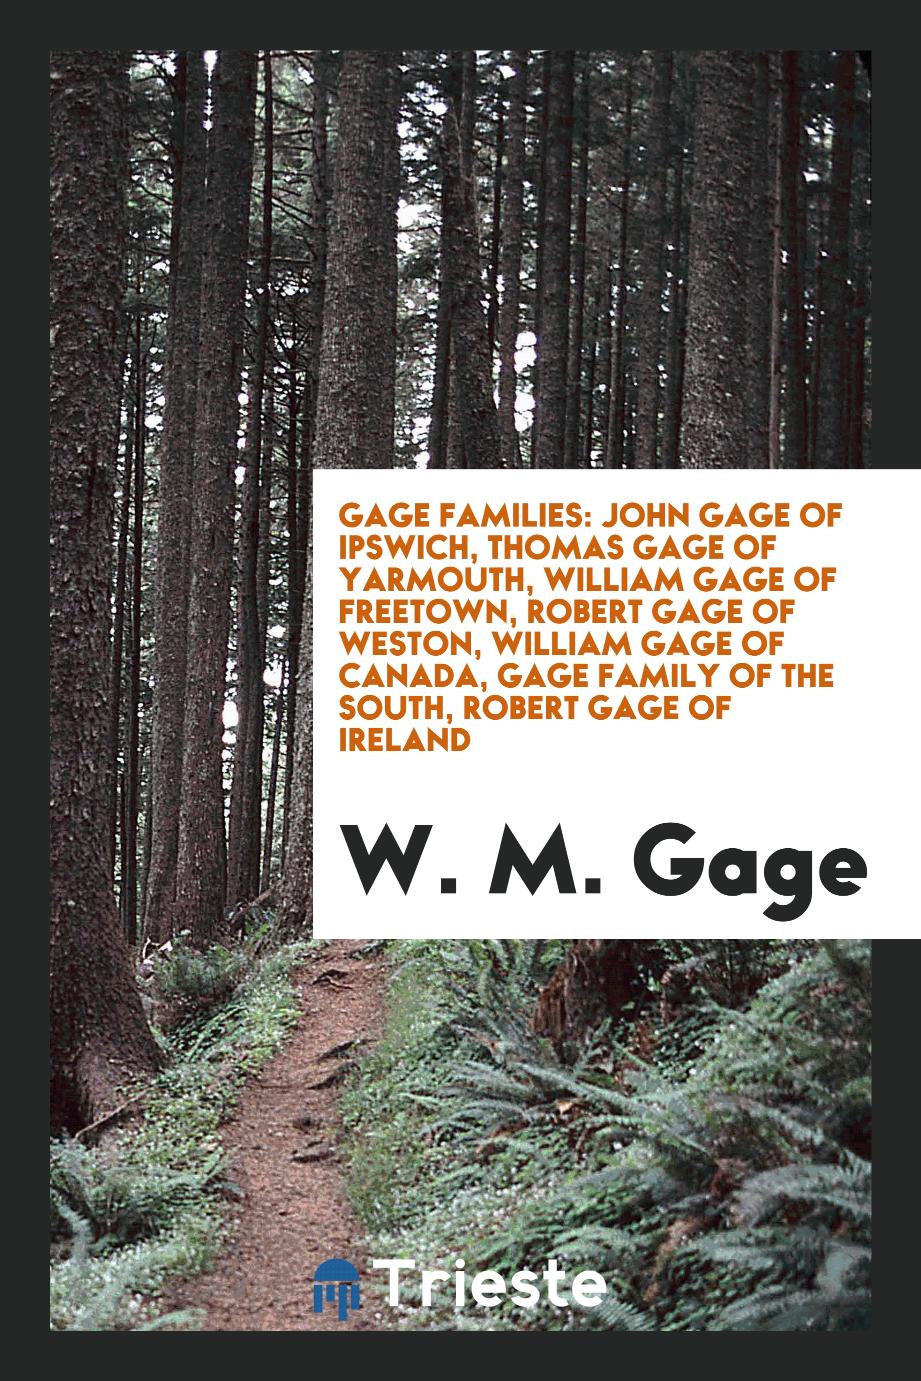 Gage families: John Gage of Ipswich, Thomas Gage of Yarmouth, William Gage of Freetown, Robert Gage of Weston, William Gage of Canada, Gage family of the South, Robert Gage of Ireland